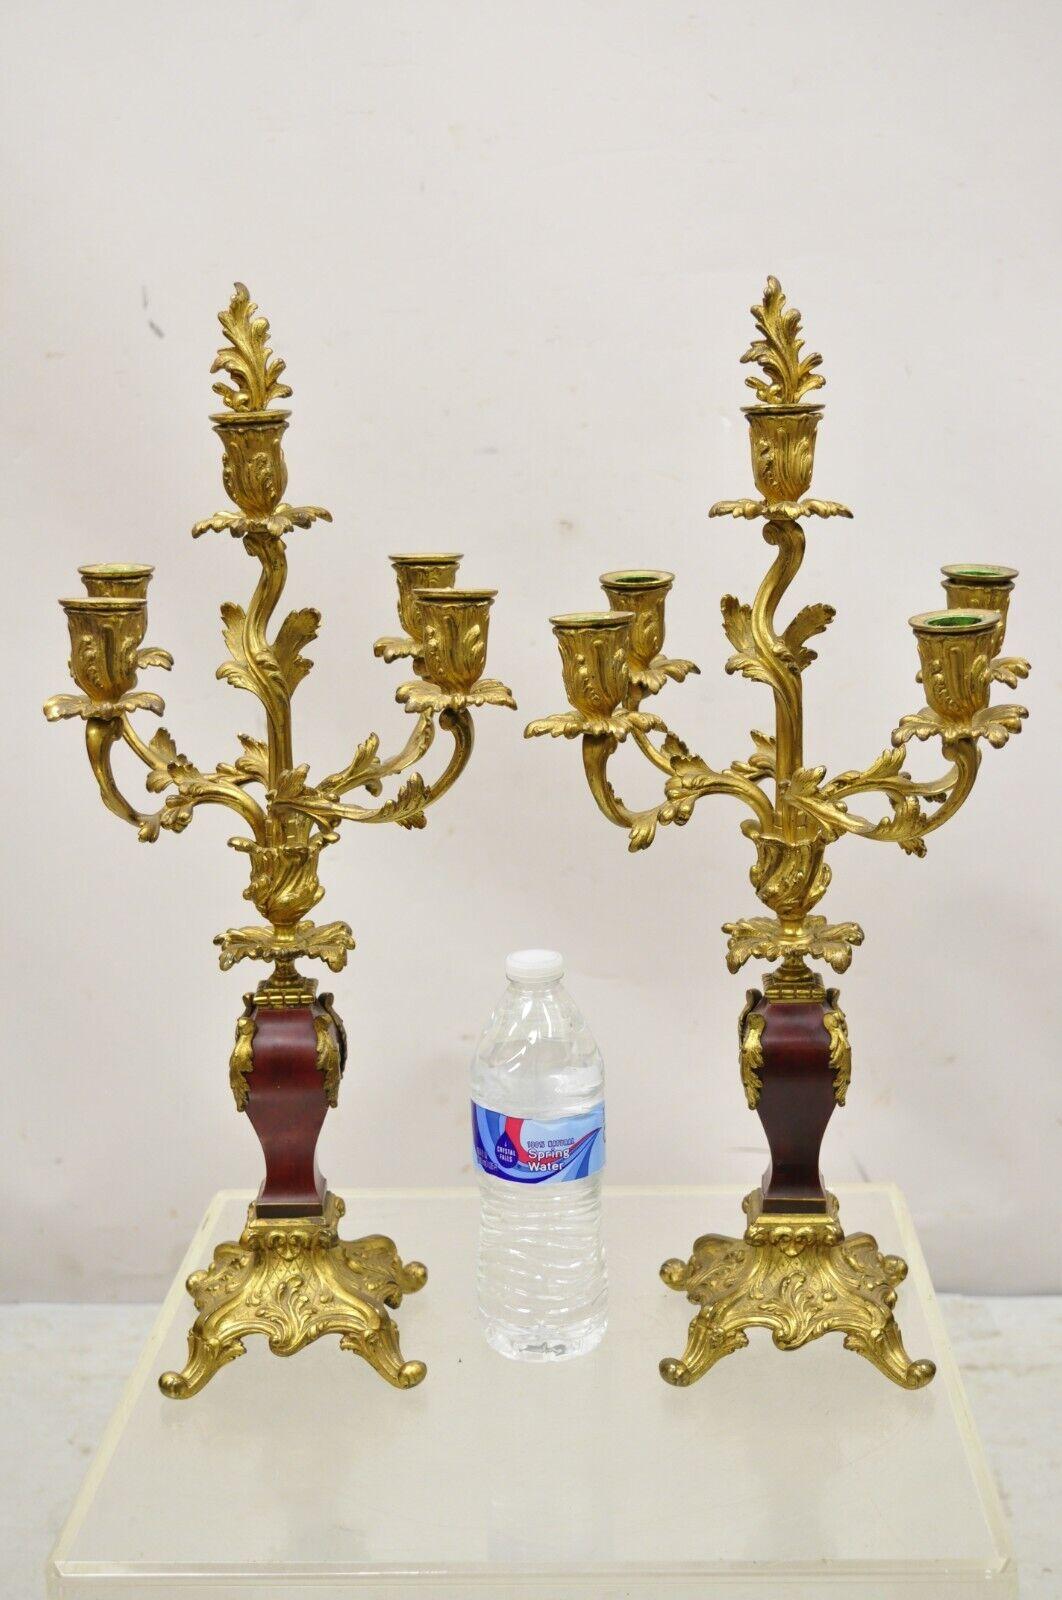 Antique French Louis XV Rococo Style Gold Gilt Bronze Candelabras, a Pair For Sale 6